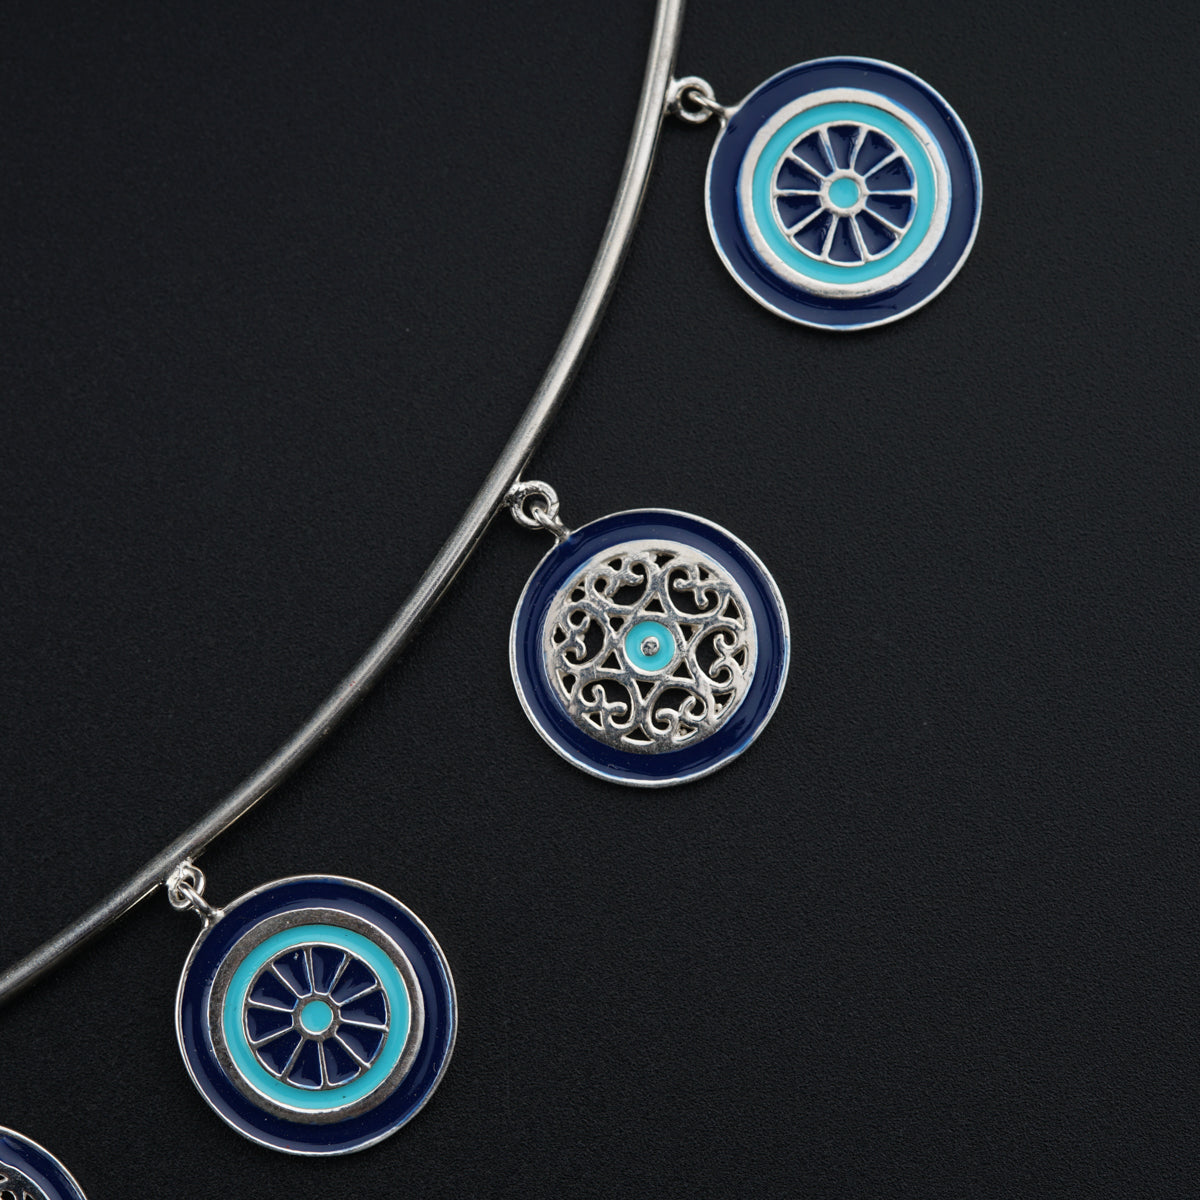 a silver necklace with blue and white designs on it